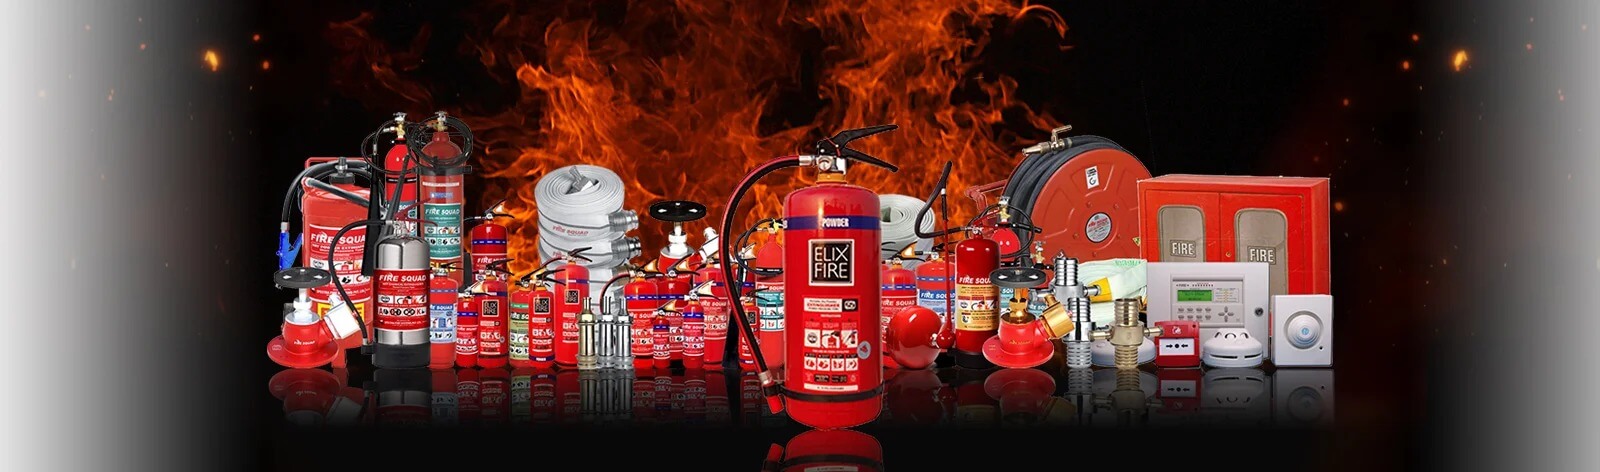 Fire Protection & Detection Equipment